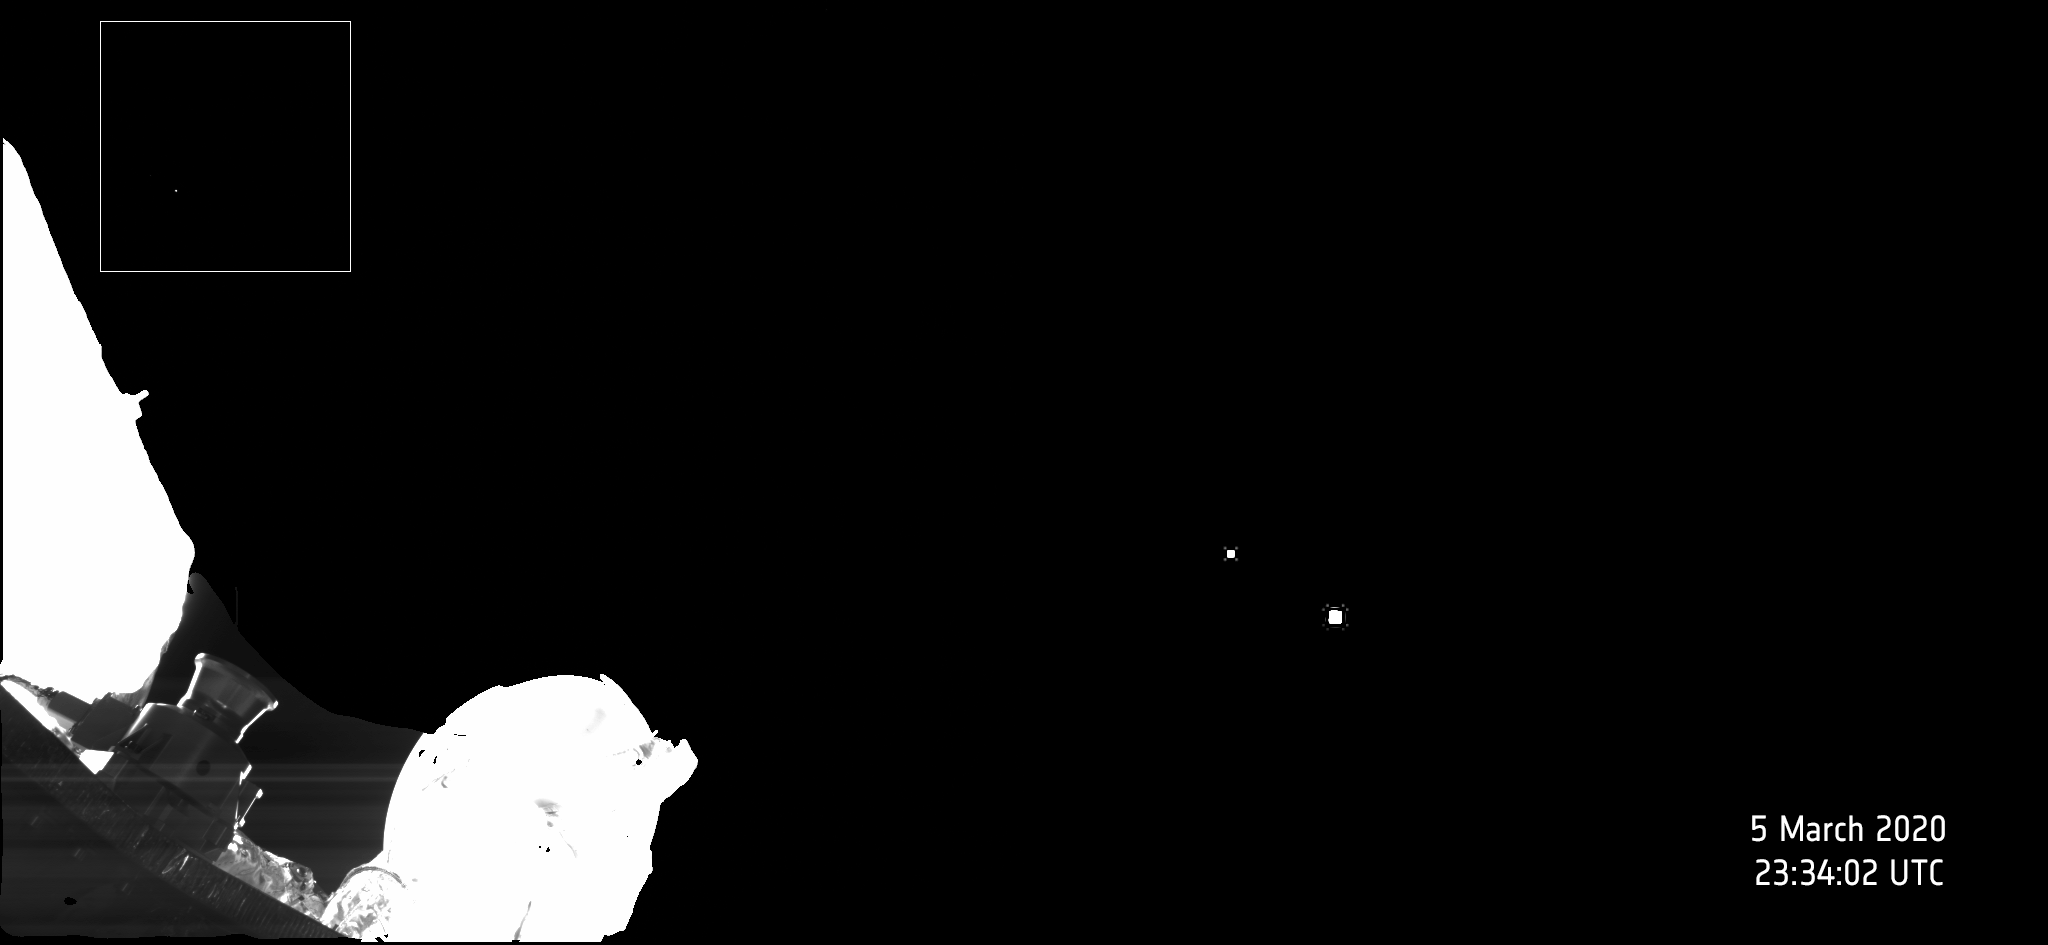 Earth and the Moon as captured by one of BepiColombo's selfie cameras in early March 2020 during the spacecraft's approach to Earth ahead of its flyby on April 10